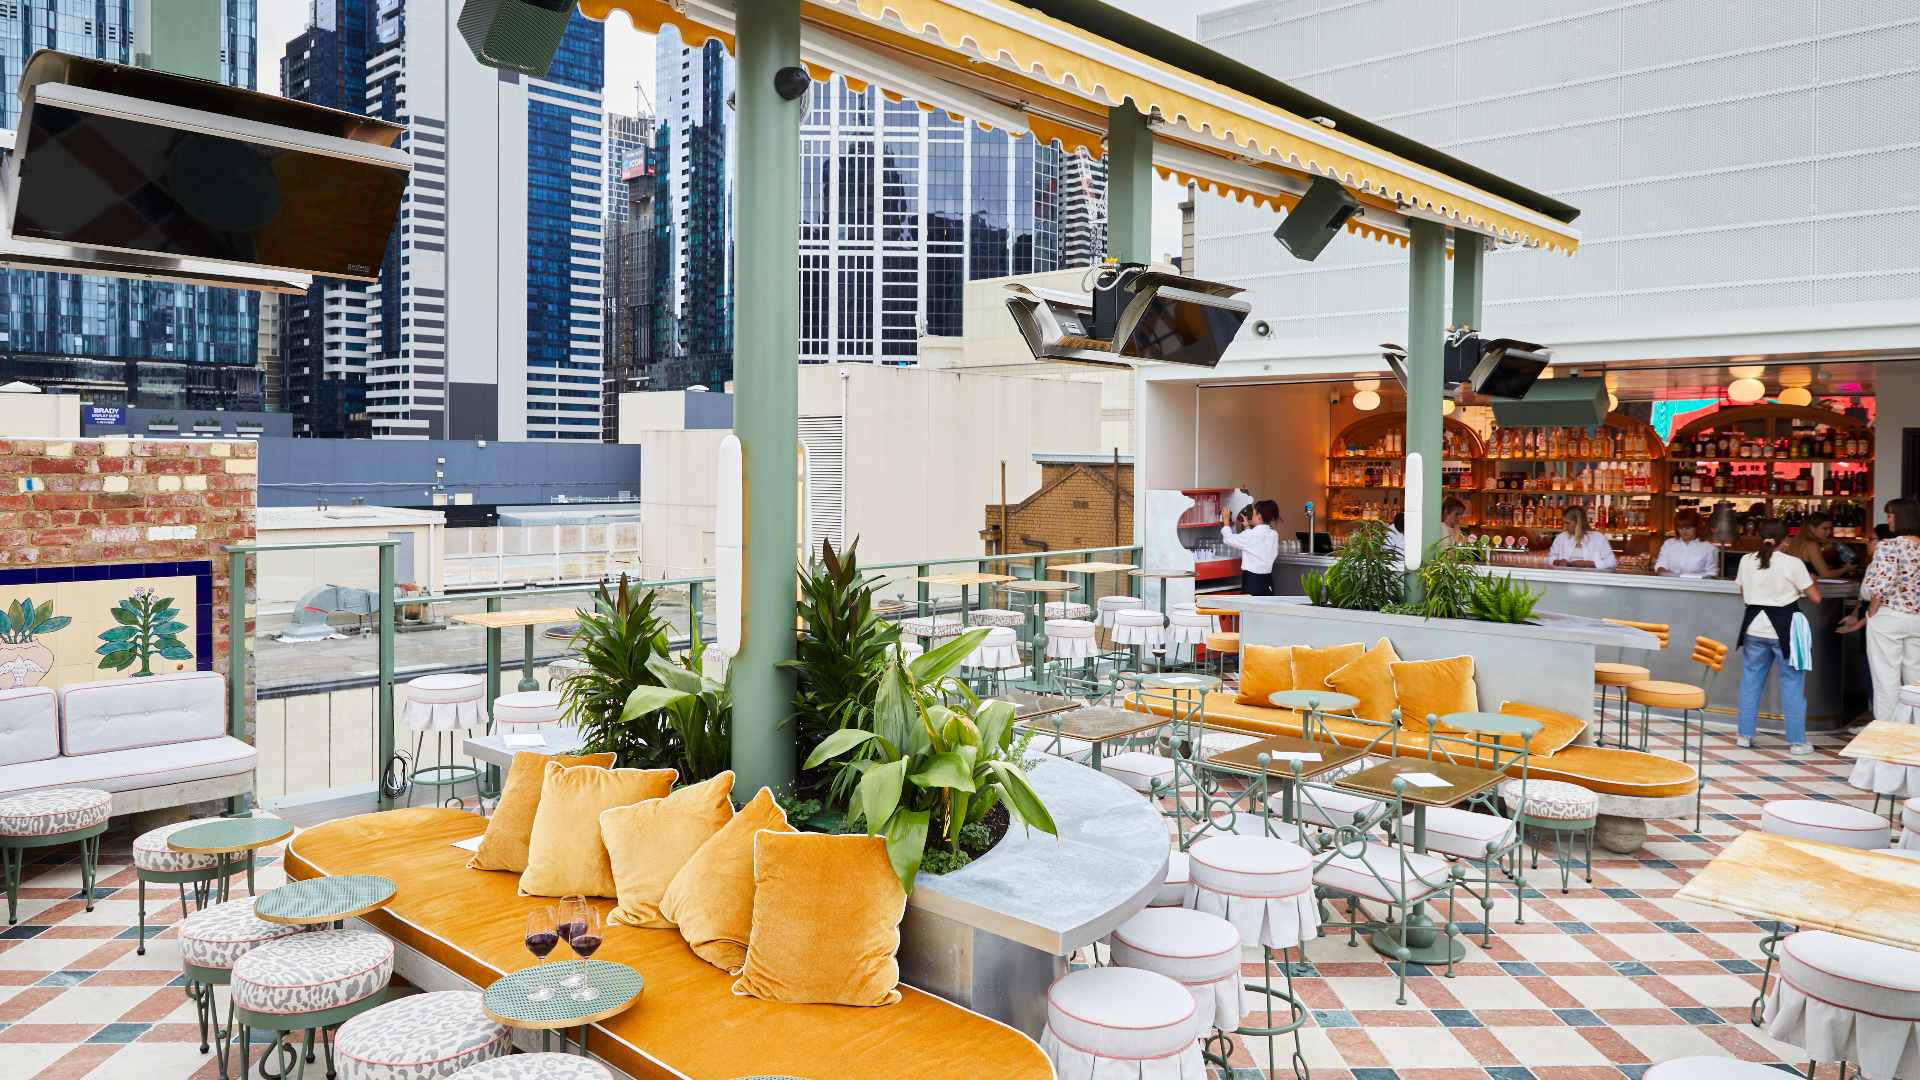 Openair rooftop bar with plants and yellow banquette seating